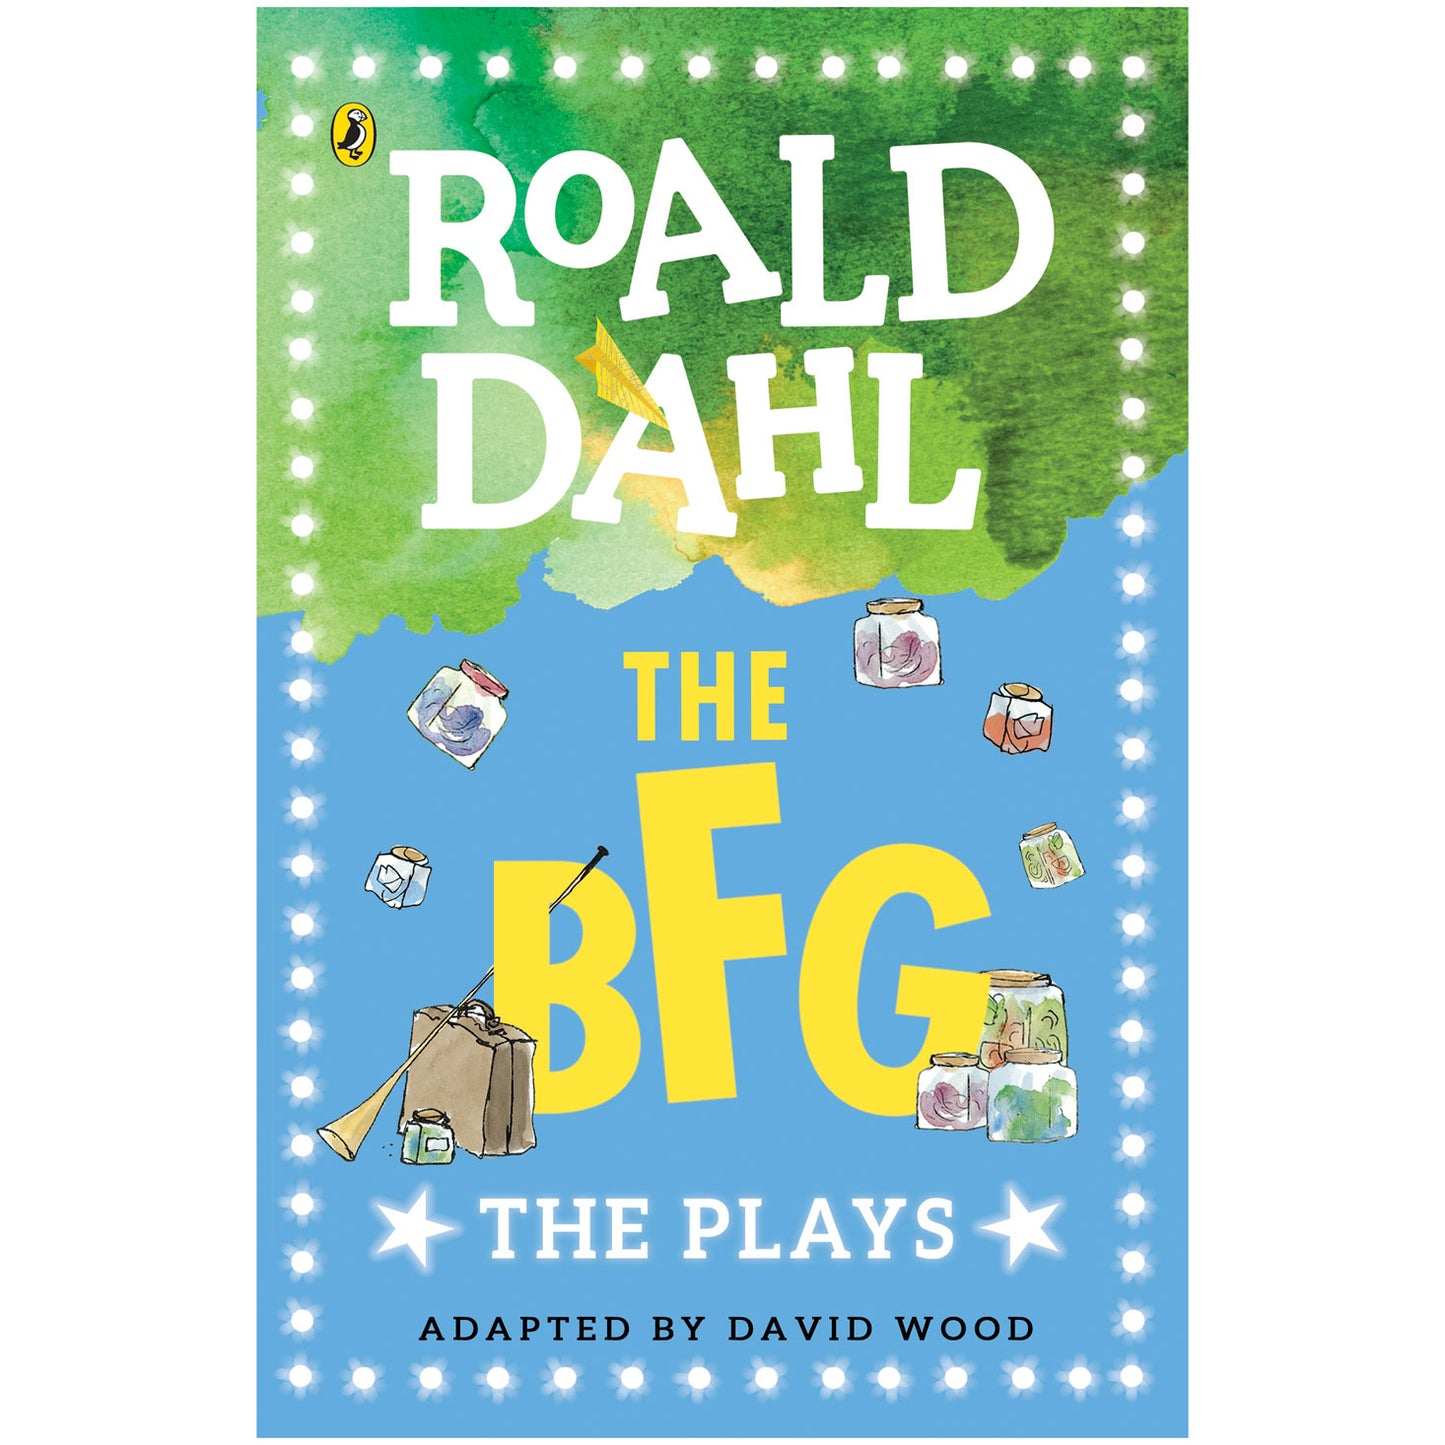 Plays based on Roald Dahl's The BFG with illustrations by Quentin Blake